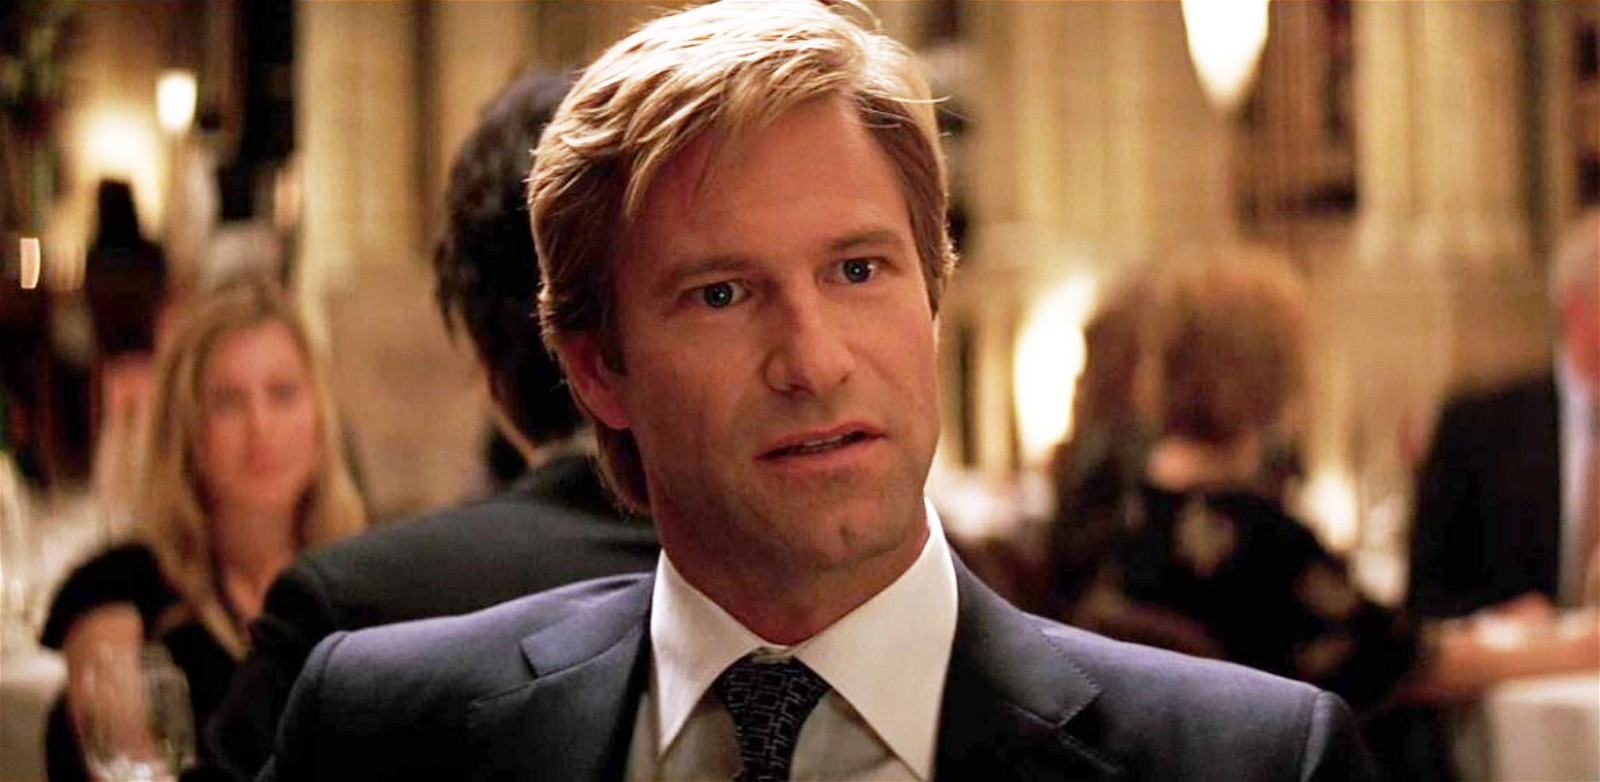 Jonathan Nolan wrote the iconic Harvey Dent line in The Dark Knight